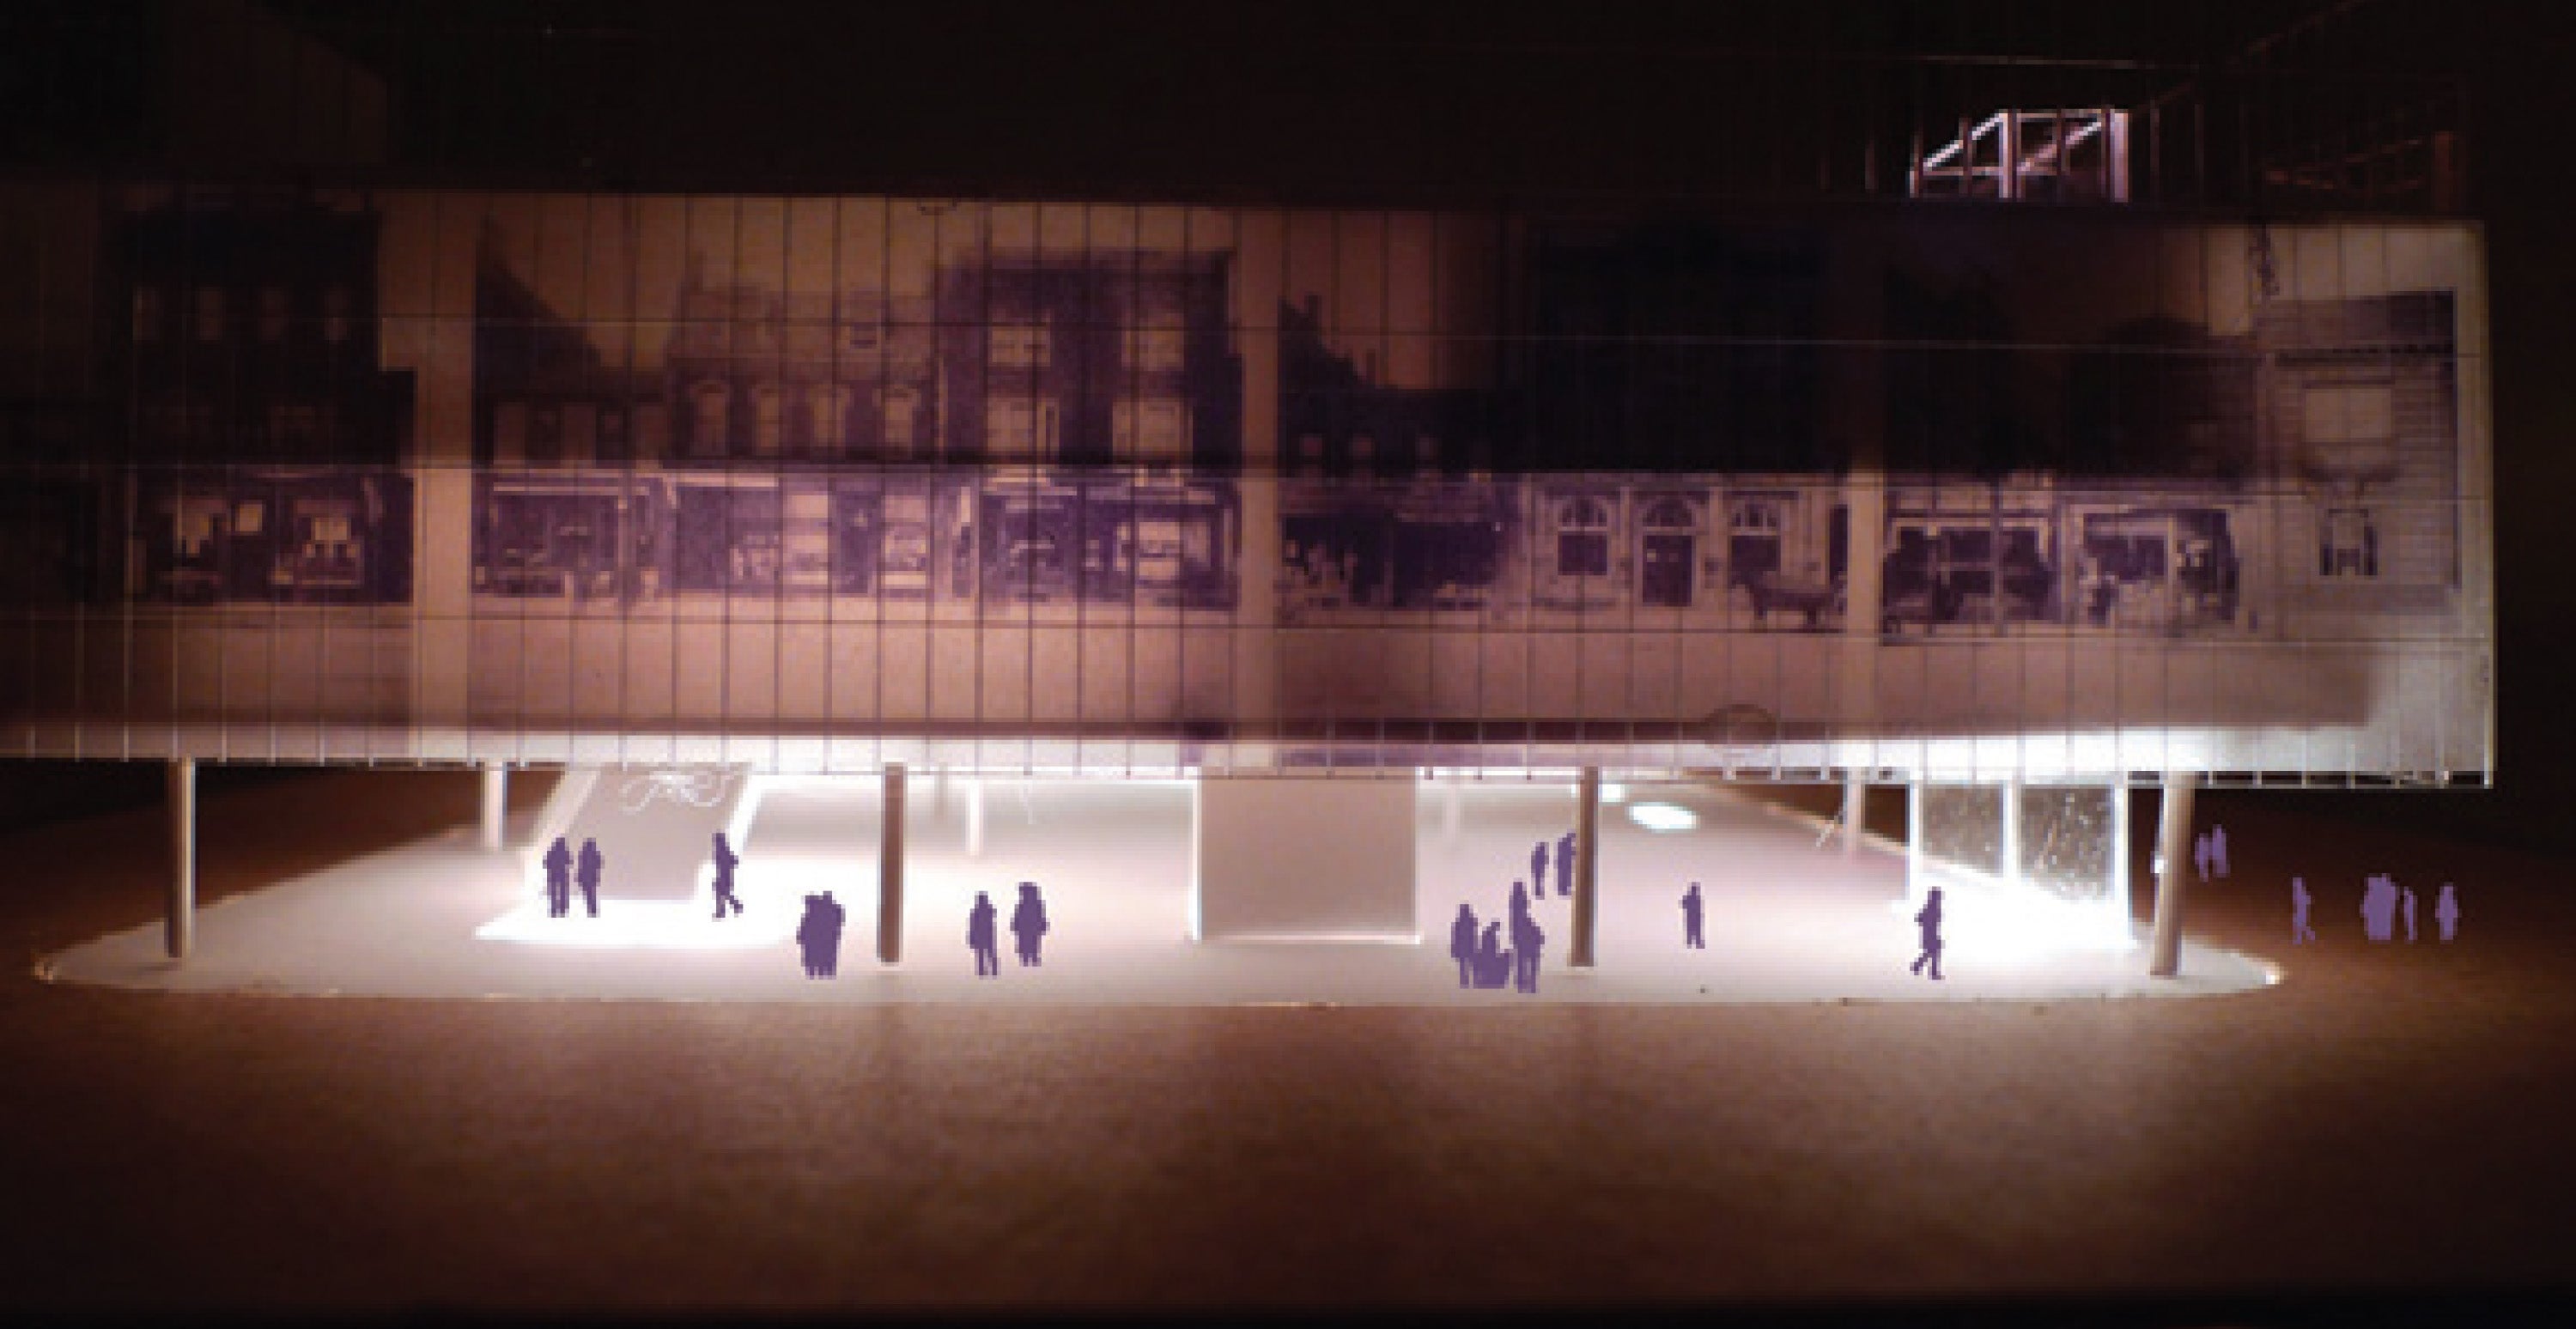 A physical model of a large urban building, it is lit with LED lights from the interior.